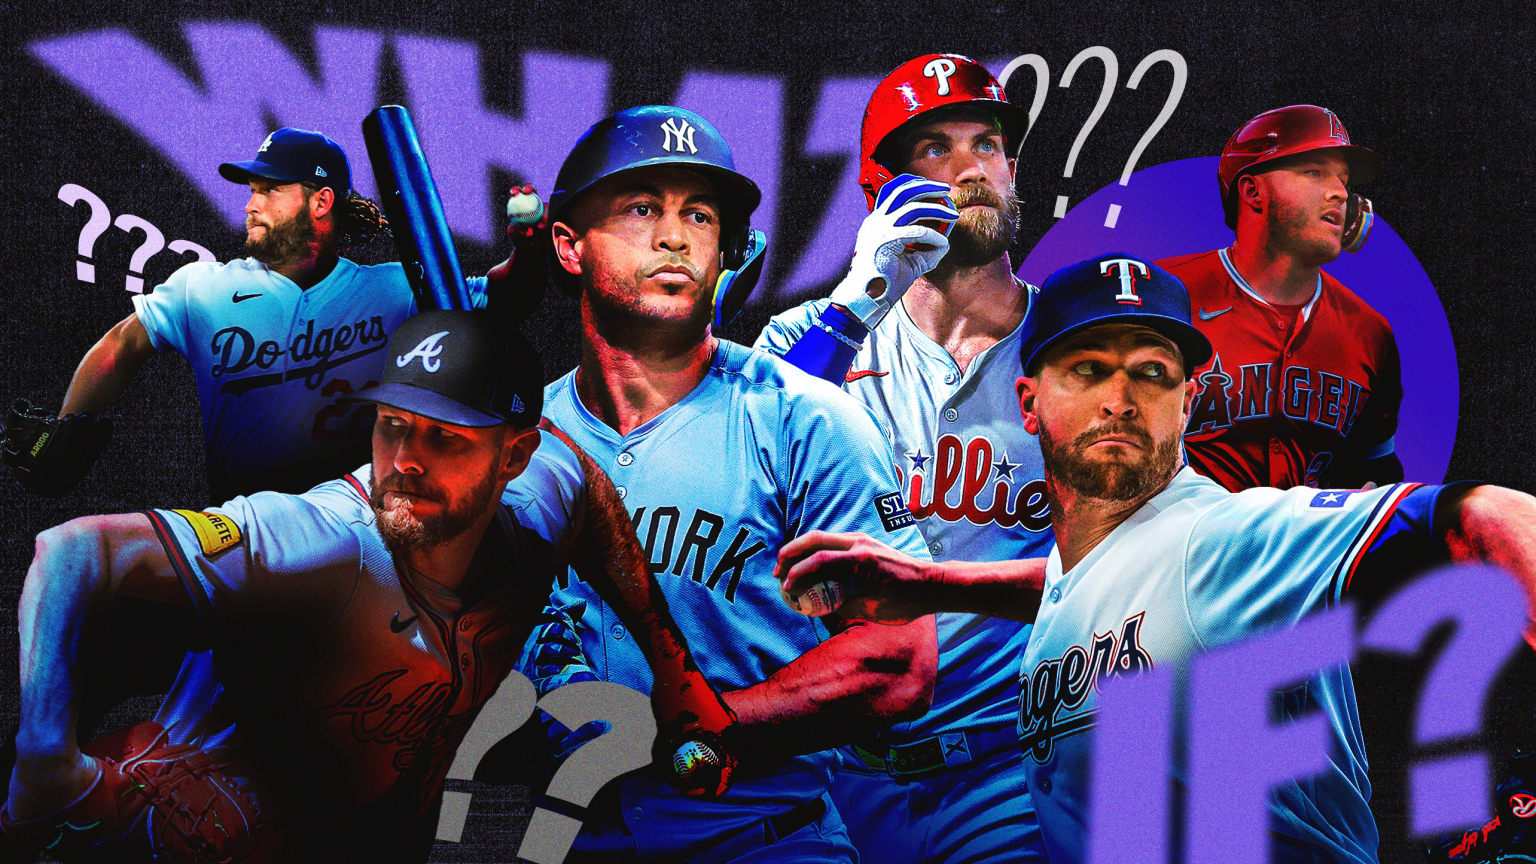 Clayton Kershaw, Chris Sale, Giancarlo Stanton, Bryce Harper, Jacob deGrom and Mike Trout